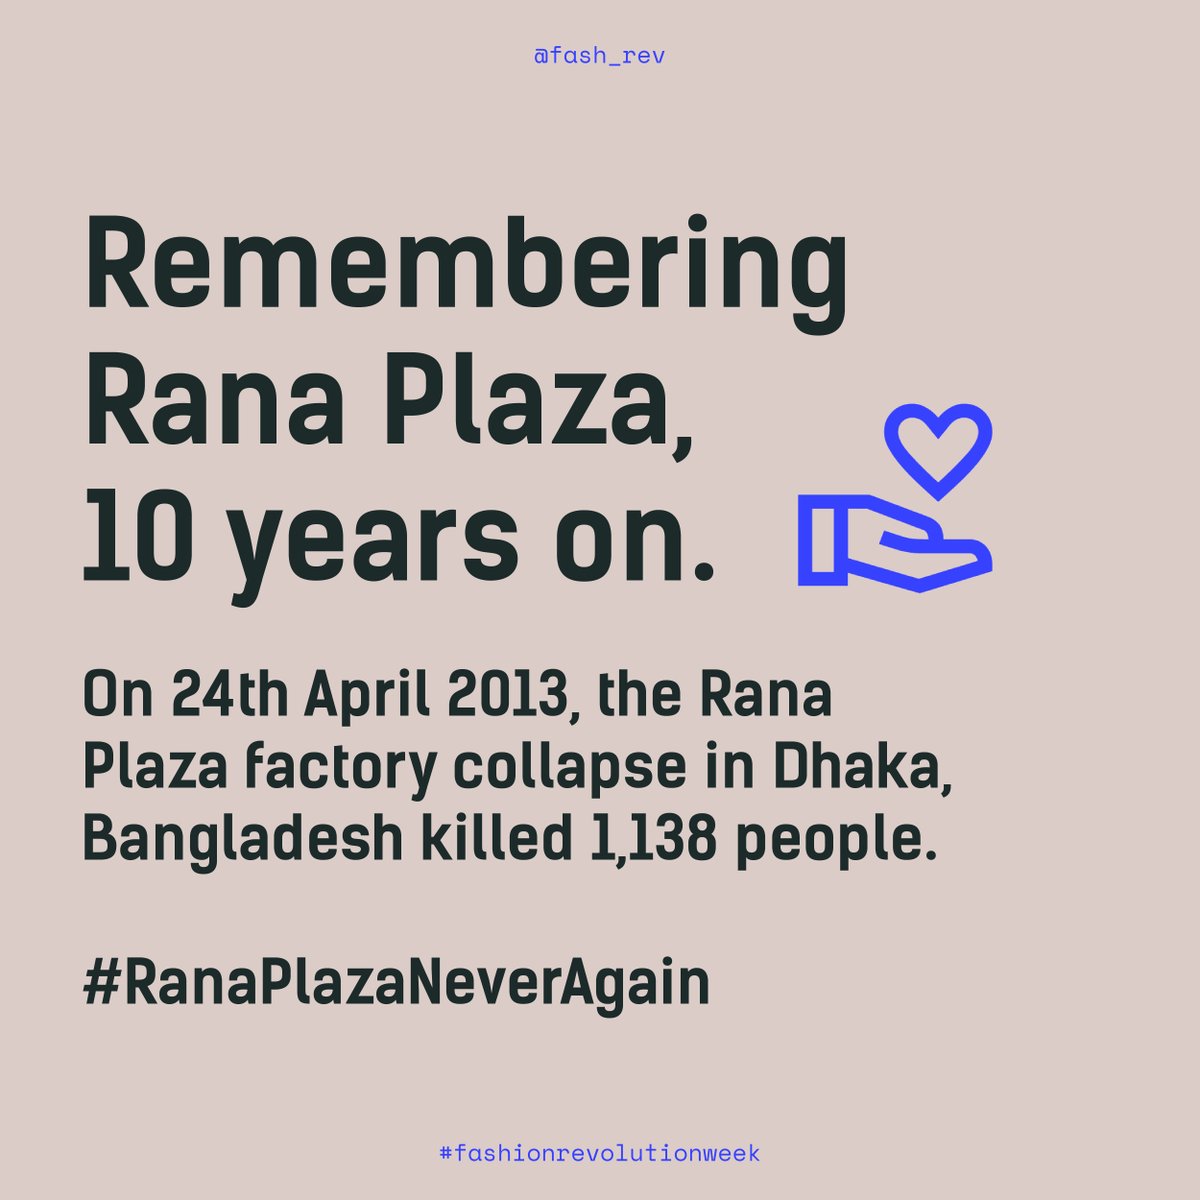 A decade on, we are #RememberingRanaPlaza.

Today, we remember the 1,138 lives lost. We remember the workers and families affected by this preventable tragedy and demand that nobody dies for fashion.